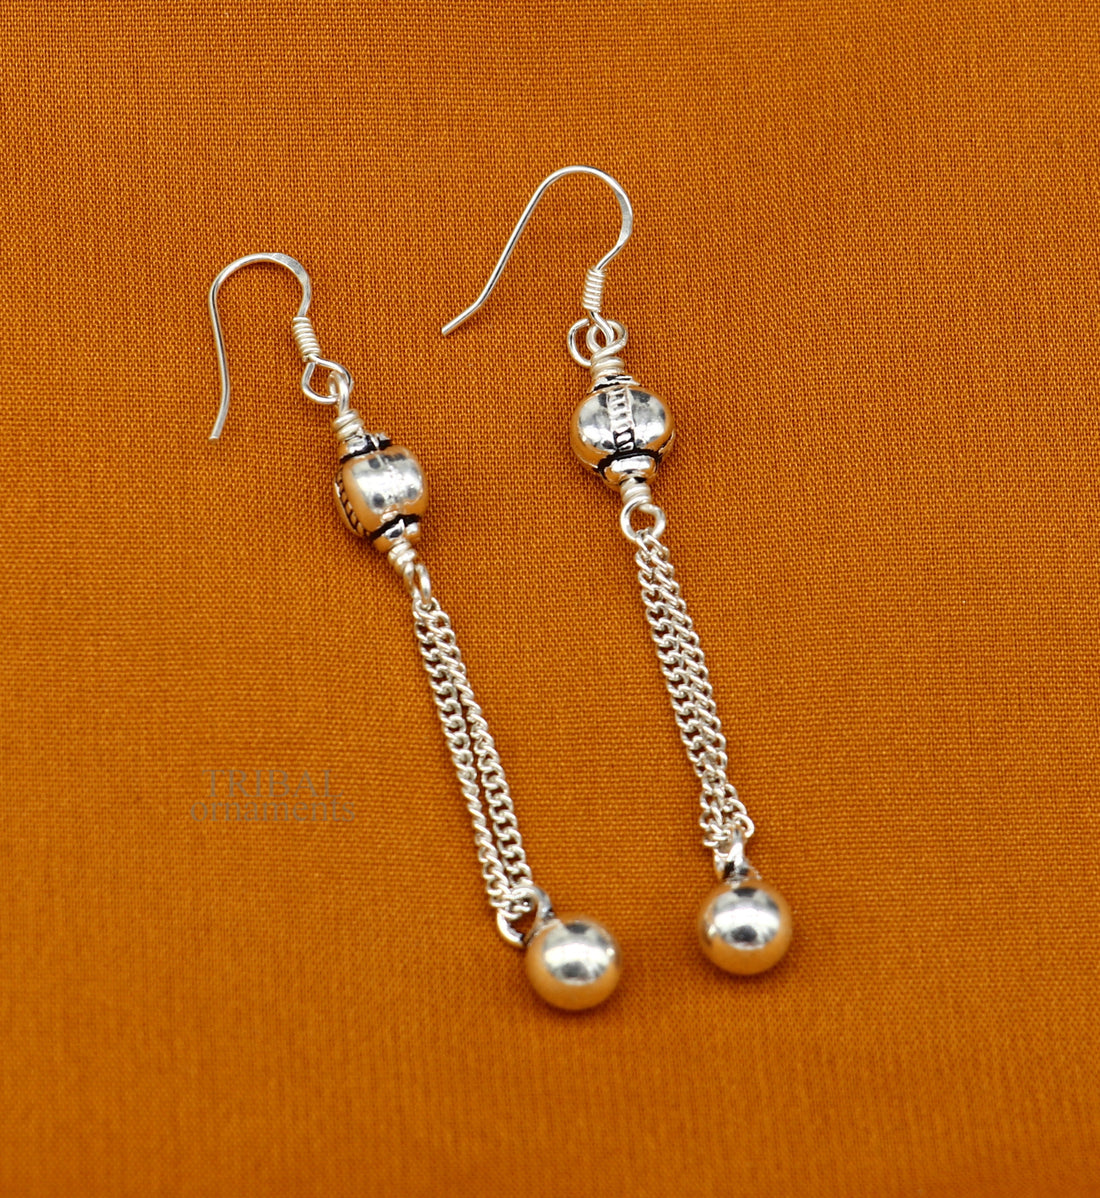 Exclusive 925 sterling silver handmade hook earrings with elegant fancy girl's hoops earring brides jewelry from india ear1085 - TRIBAL ORNAMENTS